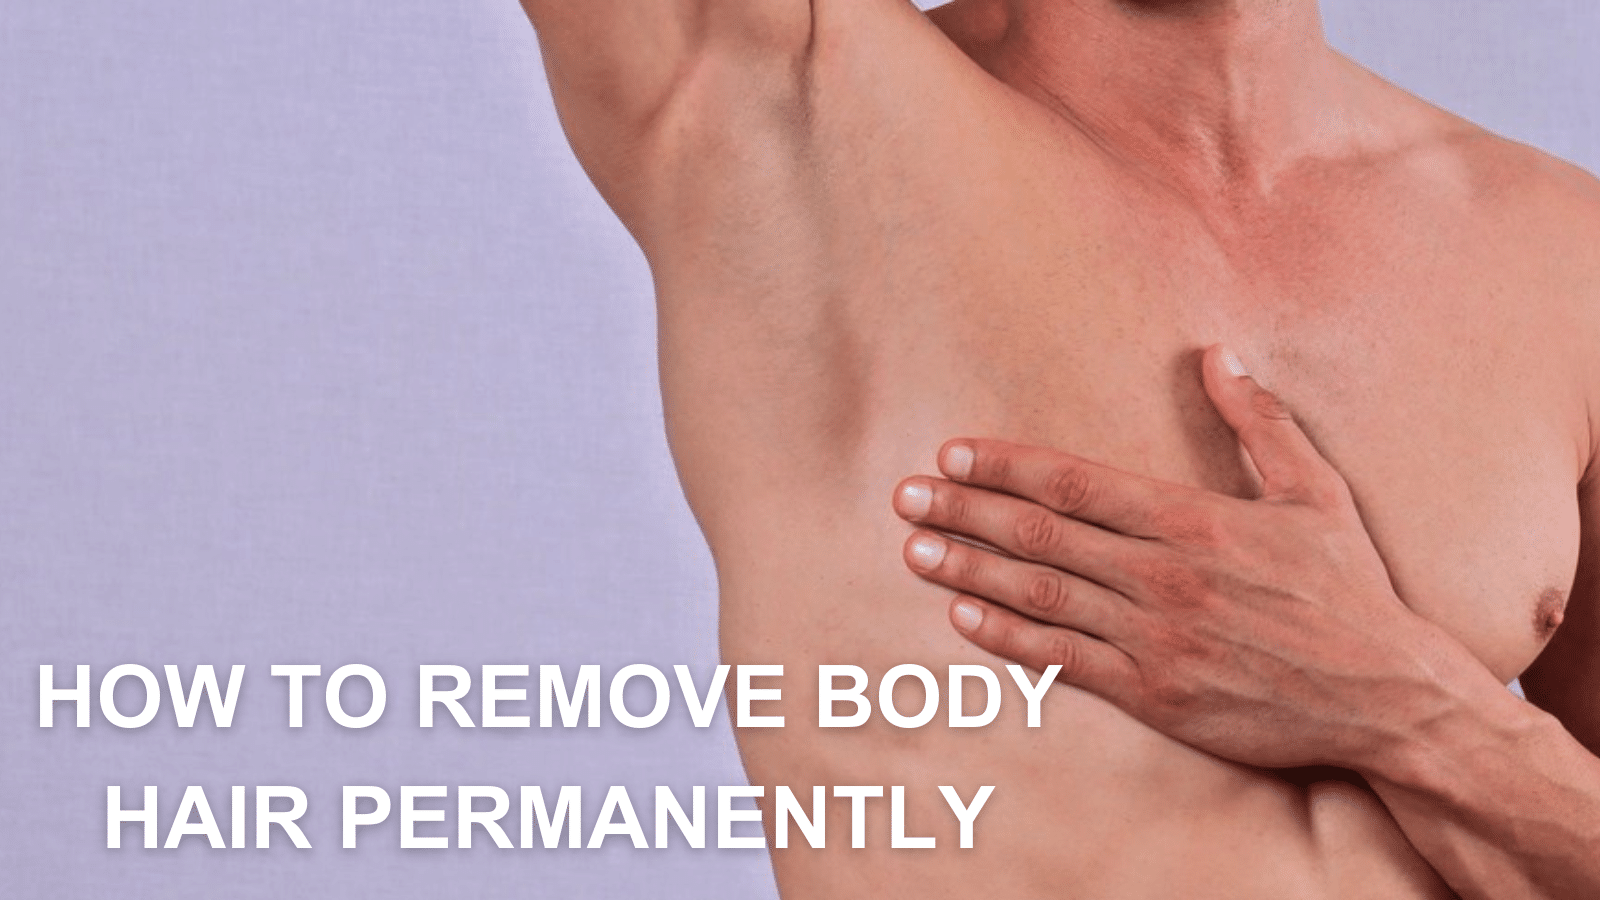 How to Remove Body Hair Permanently